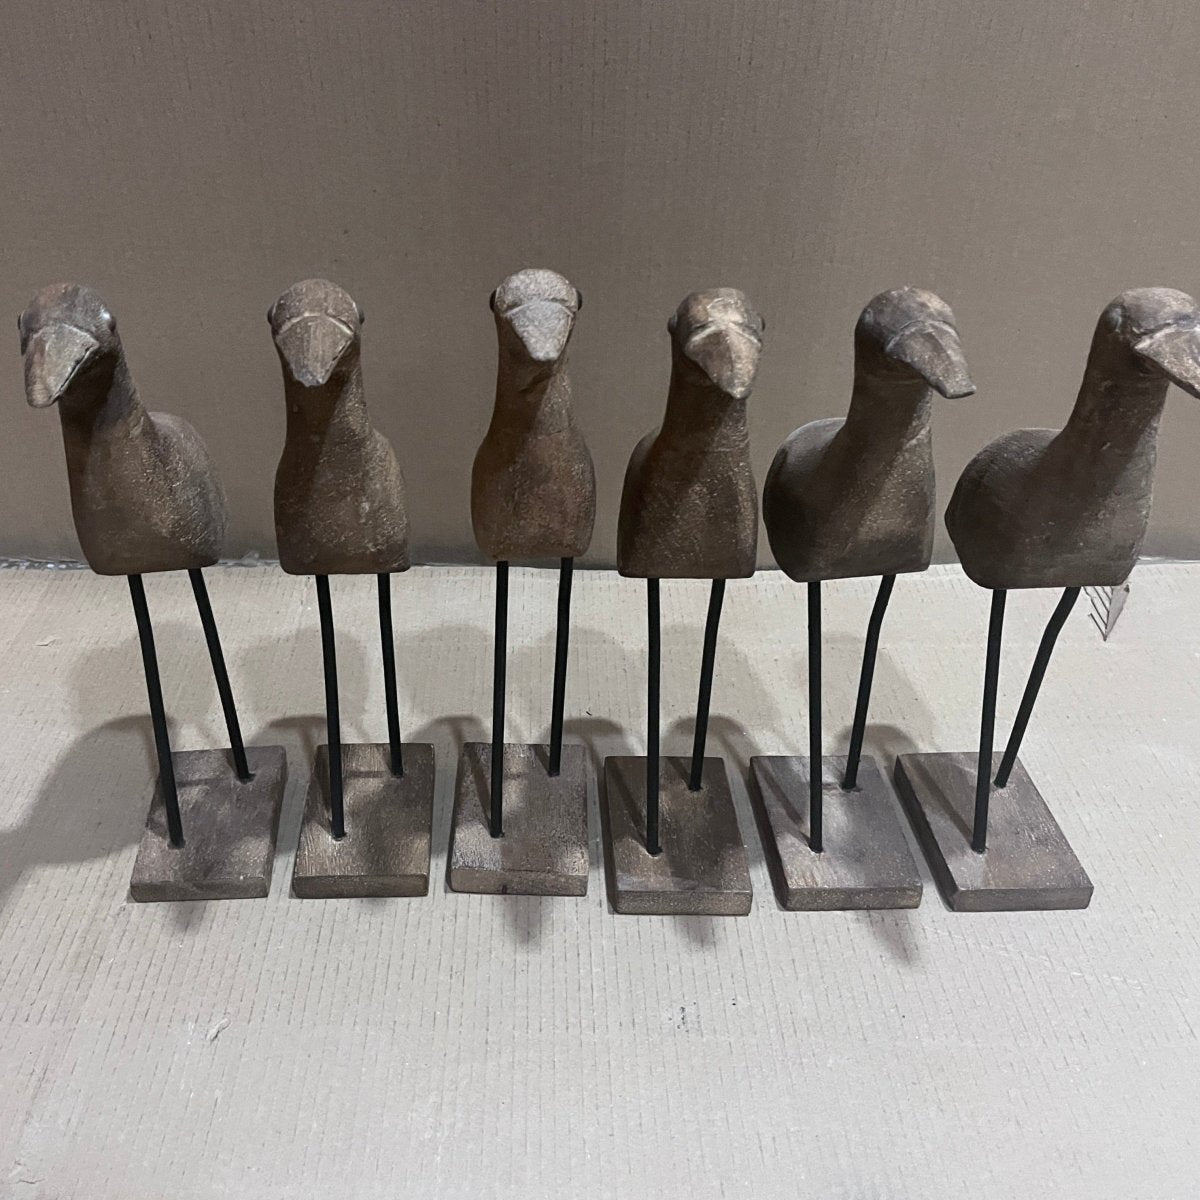 Decorative standing wooden bird with metal legs - Rustic Furniture Outlet